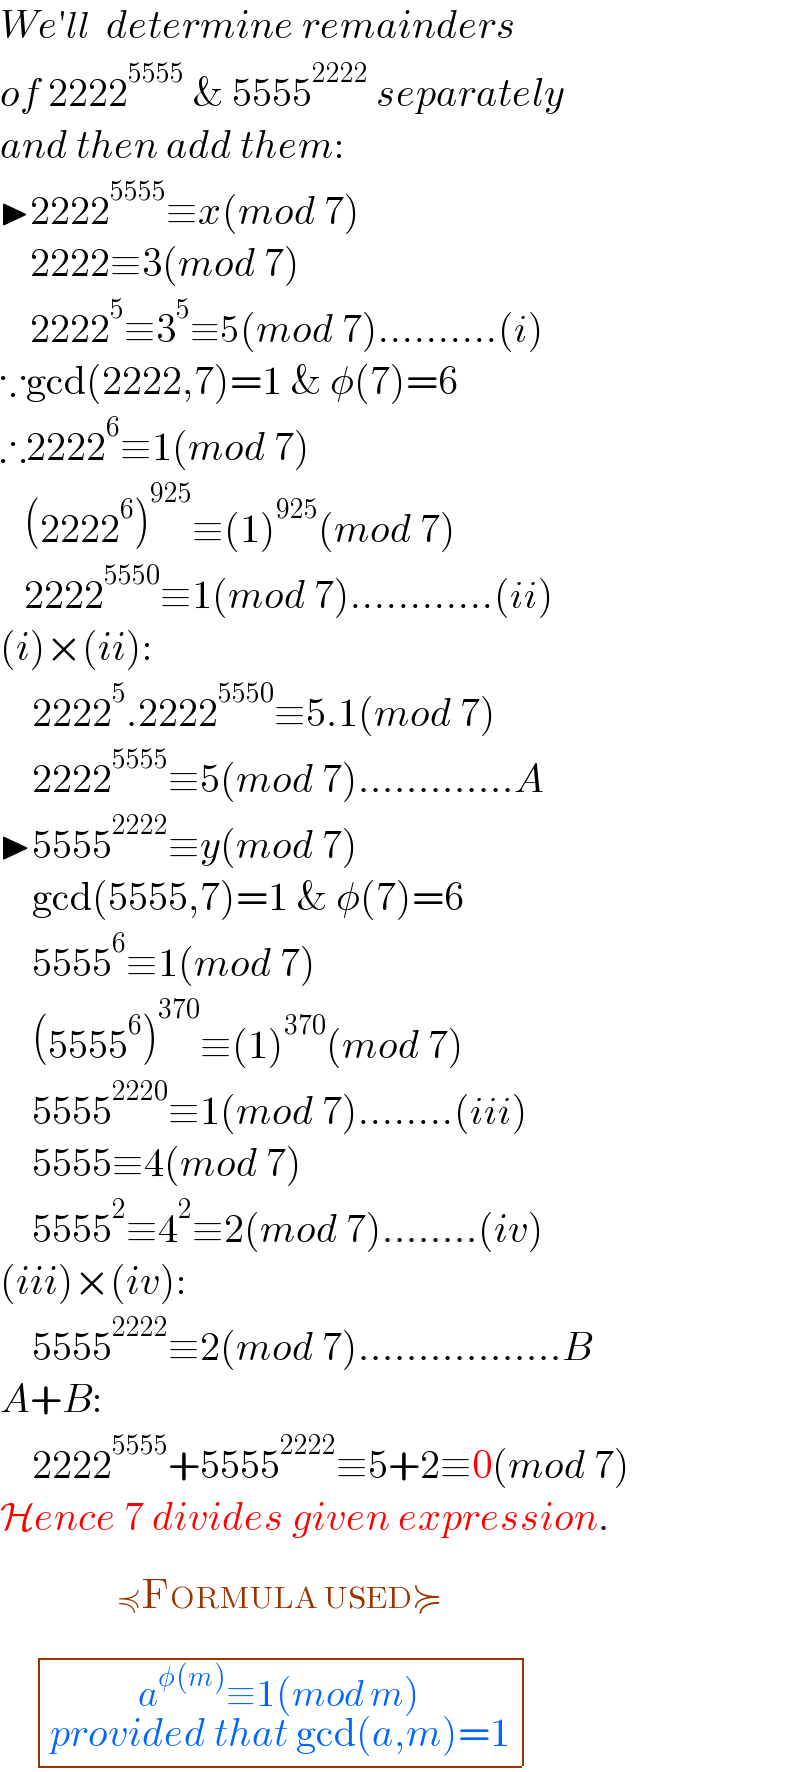 We′ll  determine remainders  of 2222^(5555)  & 5555^(2222)  separately  and then add them:  ▶2222^(5555) ≡x(mod 7)       2222≡3(mod 7)       2222^5 ≡3^5 ≡5(mod 7)..........(i)  ∵gcd(2222,7)=1 & φ(7)=6  ∴2222^6 ≡1(mod 7)     (2222^6 )^(925) ≡(1)^(925) (mod 7)     2222^(5550) ≡1(mod 7)............(ii)  (i)×(ii):      2222^5 .2222^(5550) ≡5.1(mod 7)      2222^(5555) ≡5(mod 7).............A  ▶5555^(2222) ≡y(mod 7)      gcd(5555,7)=1 & φ(7)=6      5555^6 ≡1(mod 7)      (5555^6 )^(370) ≡(1)^(370) (mod 7)      5555^(2220) ≡1(mod 7)........(iii)      5555≡4(mod 7)      5555^2 ≡4^2 ≡2(mod 7)........(iv)  (iii)×(iv):      5555^(2222) ≡2(mod 7).................B  A+B:      2222^(5555) +5555^(2222) ≡5+2≡0(mod 7)  Hence 7 divides given expression.     determinant (((a^(φ(m)) ≡1(mod m)_(provided that gcd(a,m)=1) )))^ ^(≼FORMULA USED≽_(                                                ) ^(                                        ) )   